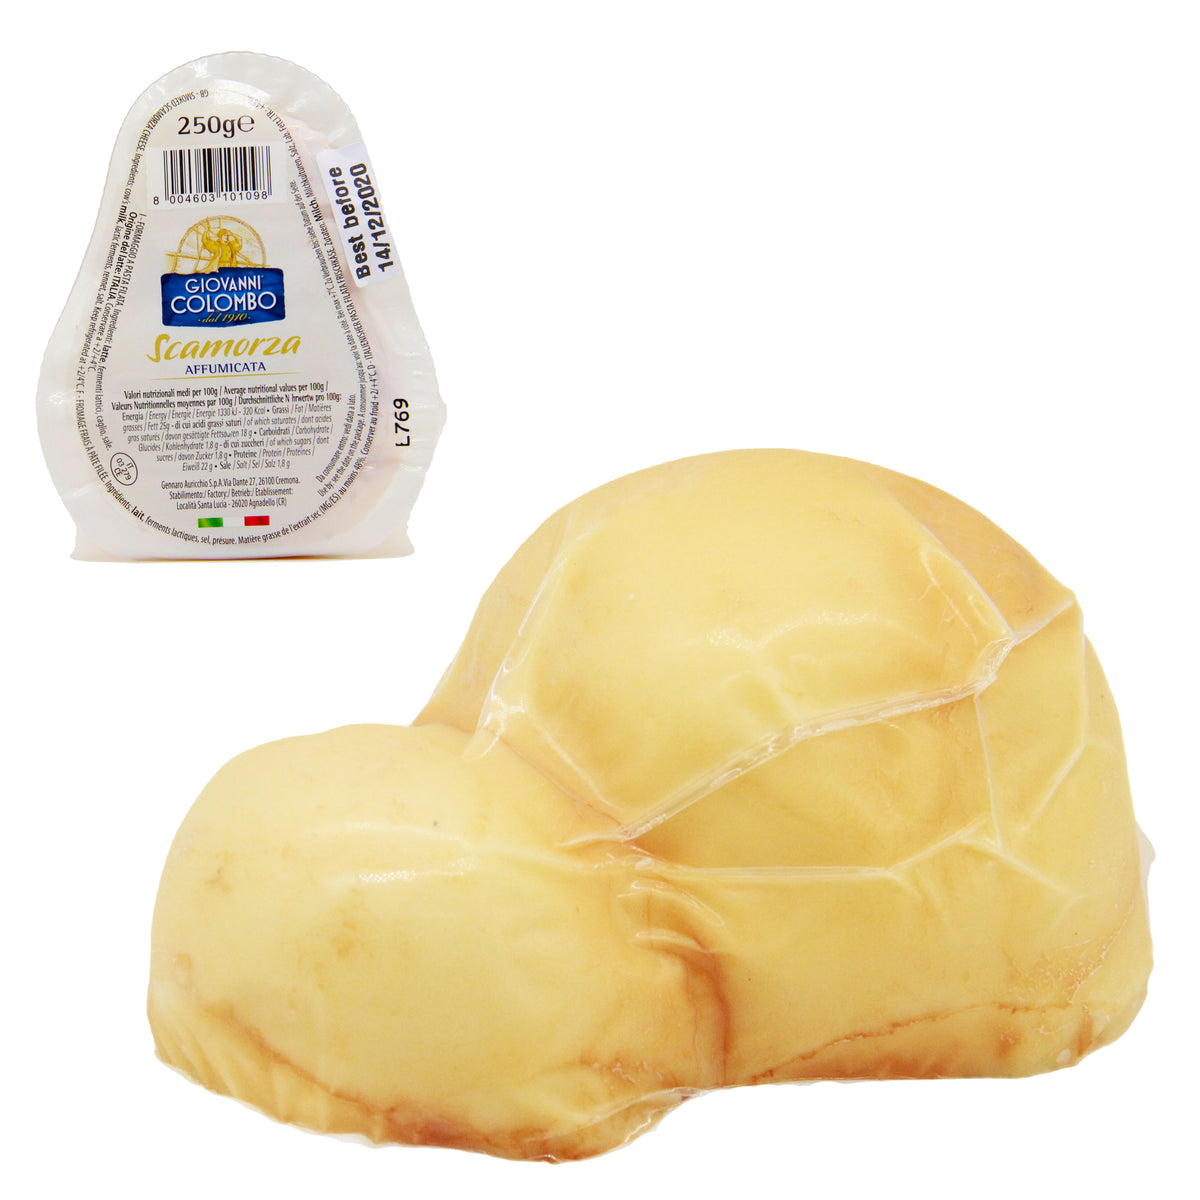 Smoked Mozzarella 250gr (Scamorza) – Stable Trading Limited